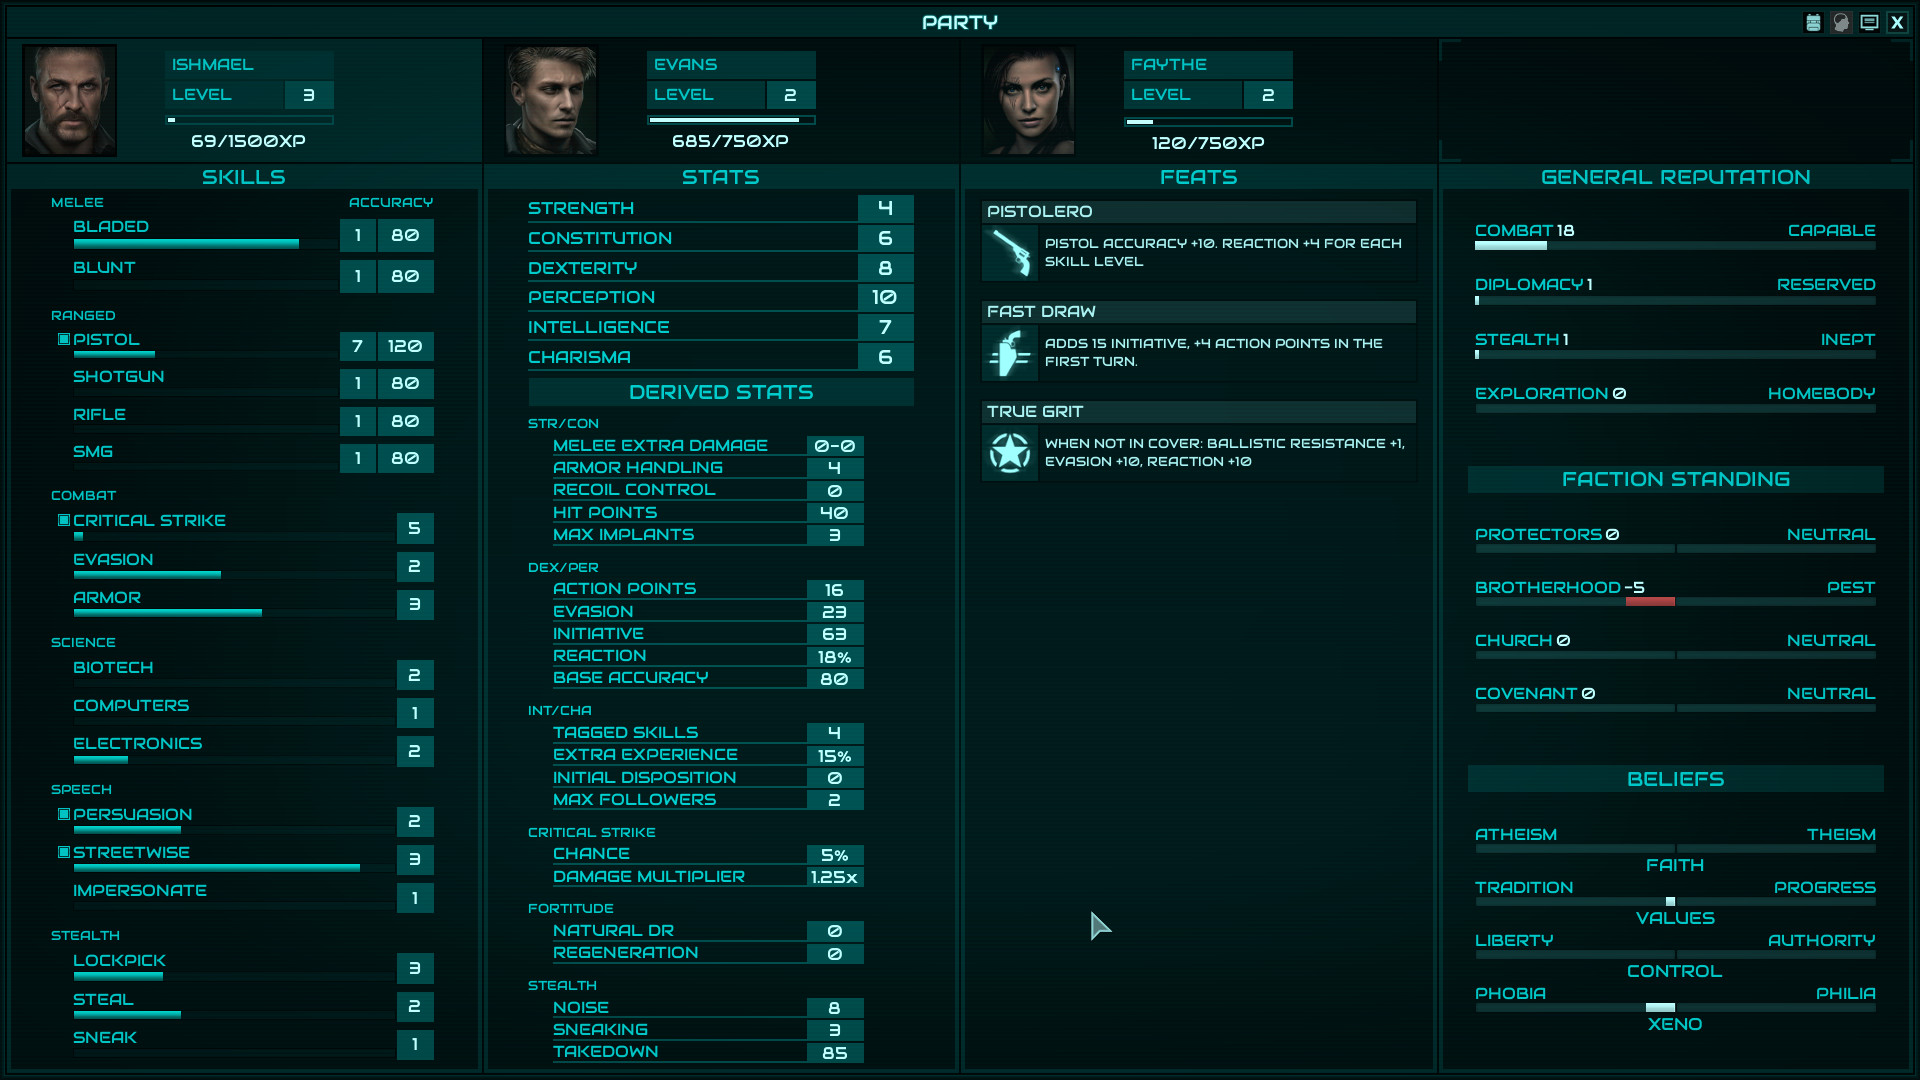 Colony Ship: A Post-Earth Role Playing Game screenshot